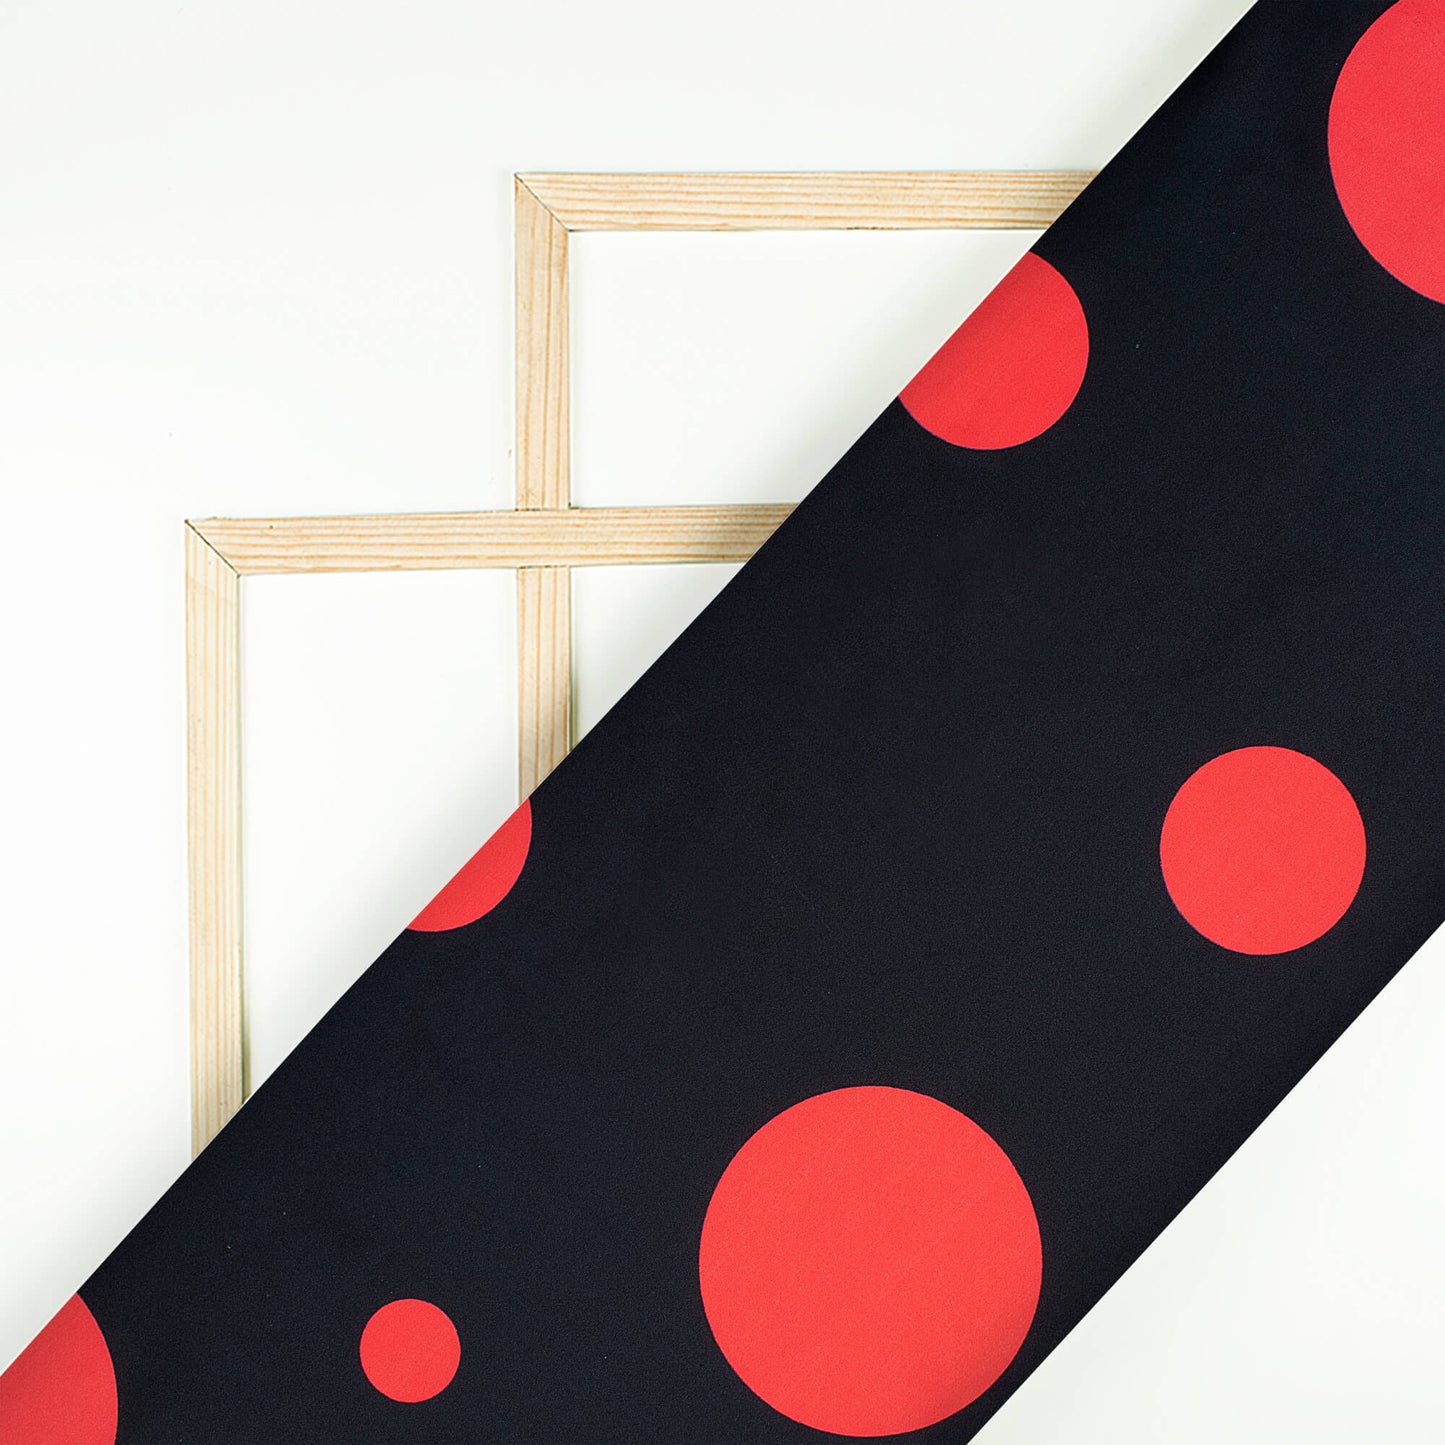 Black And Candy Red Polka Dot Pattern Digital Print Poly Micro Crepe Fabric